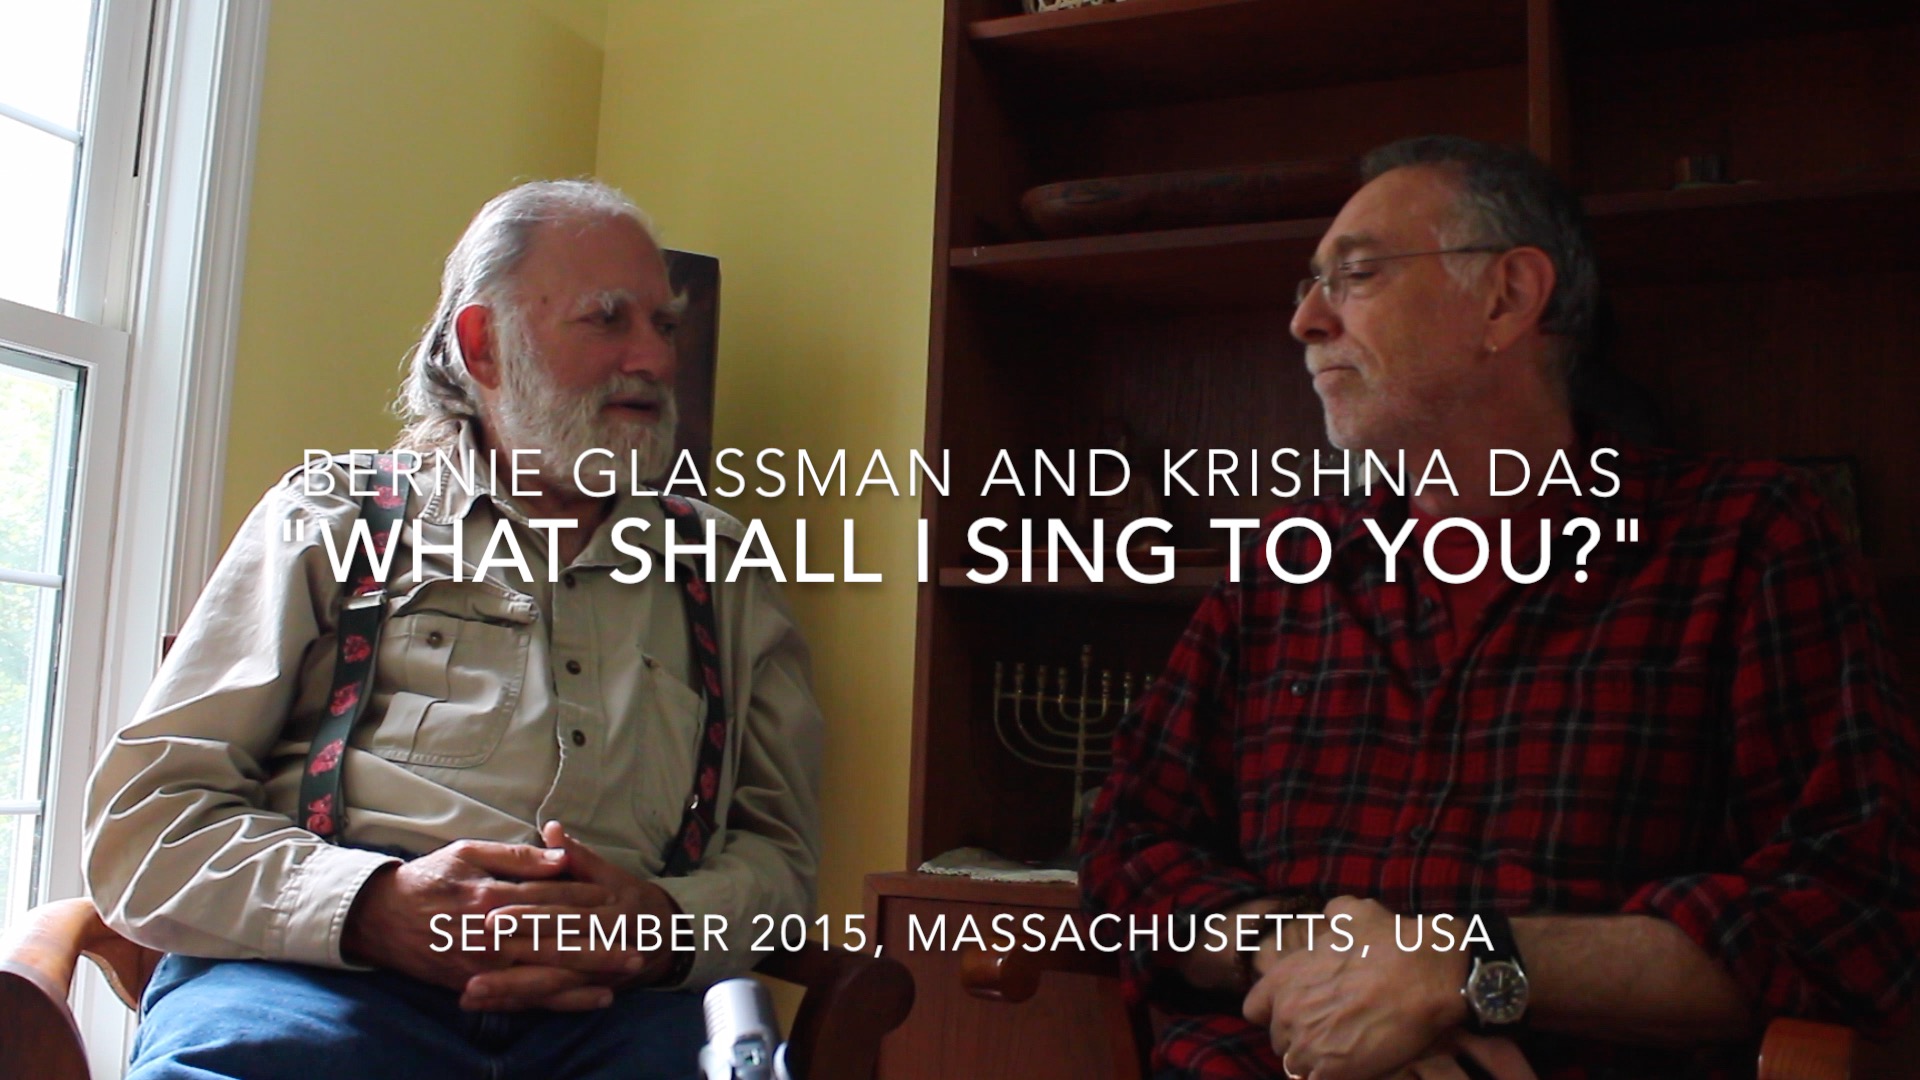 What Shall I Sing to You?" Video Interview with Bernie Glassman and Krishna Das